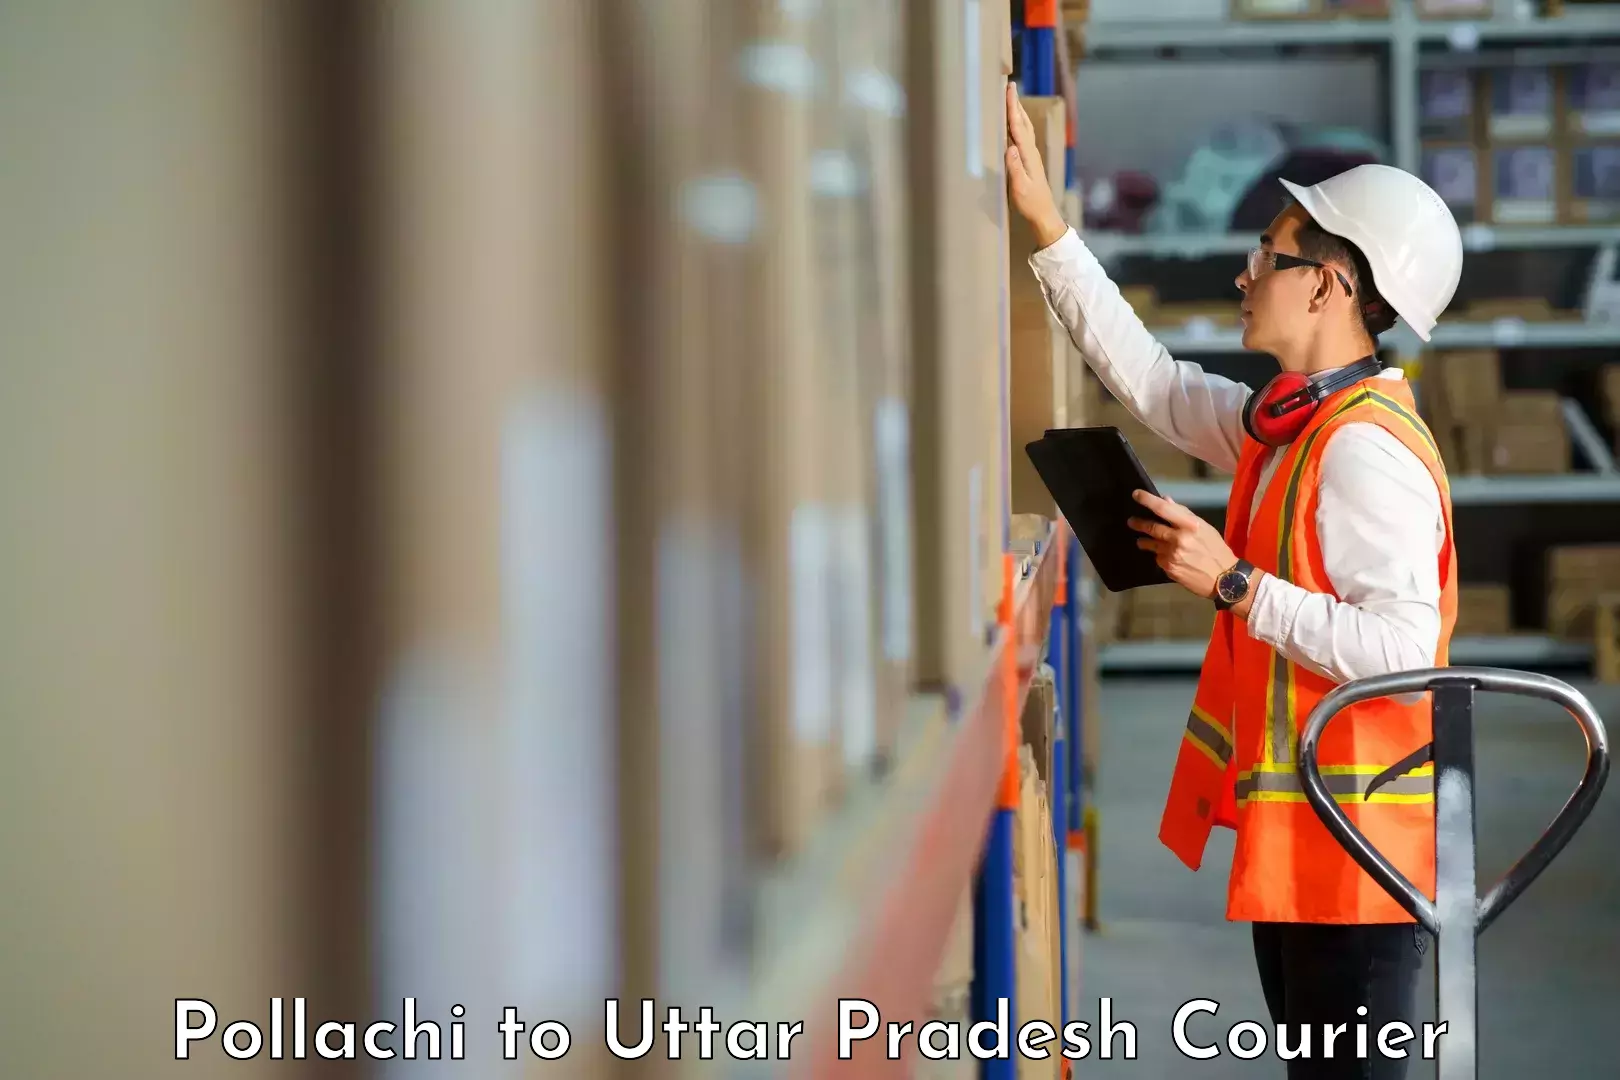 User-friendly delivery service Pollachi to Allahabad